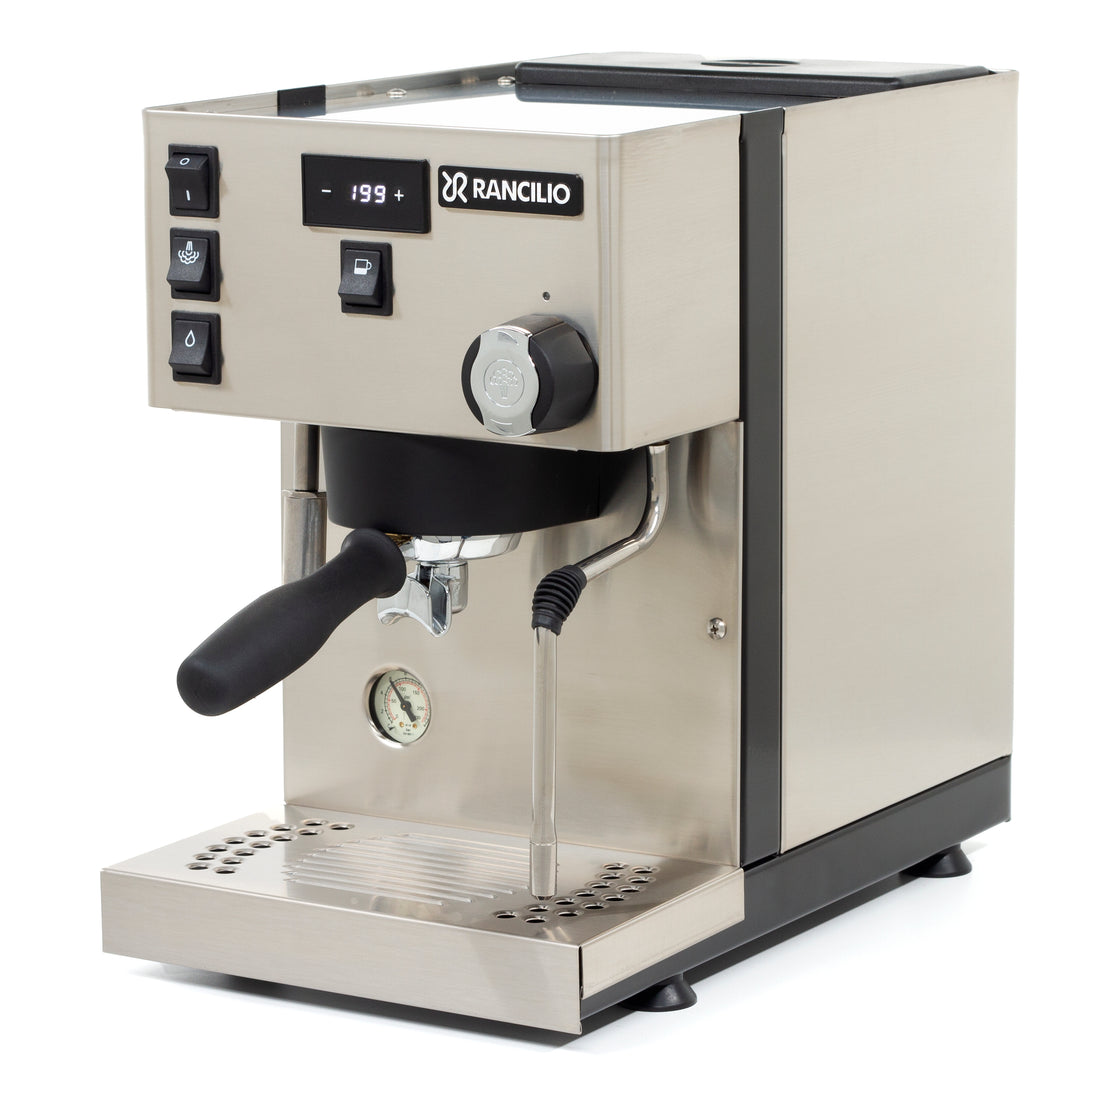 Rancilio Silvia Review 2024: Putting the Art in Artisanal Coffee